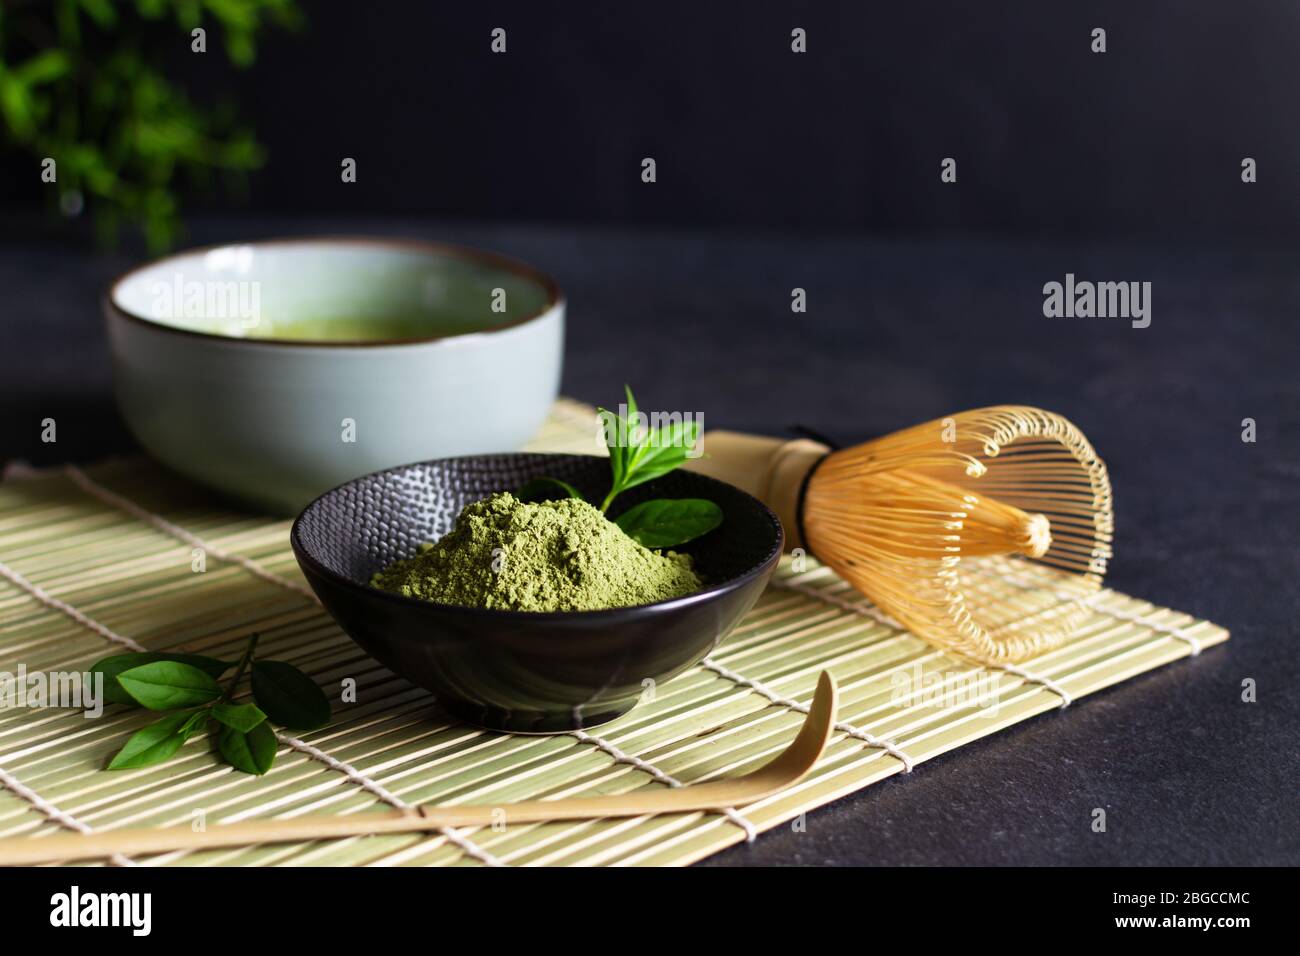 Organic green matcha tea and tea accessories on japanese mat on black background. Japanese tea ceremony concept. Chashaku spoon and chasen bamboo whis Stock Photo